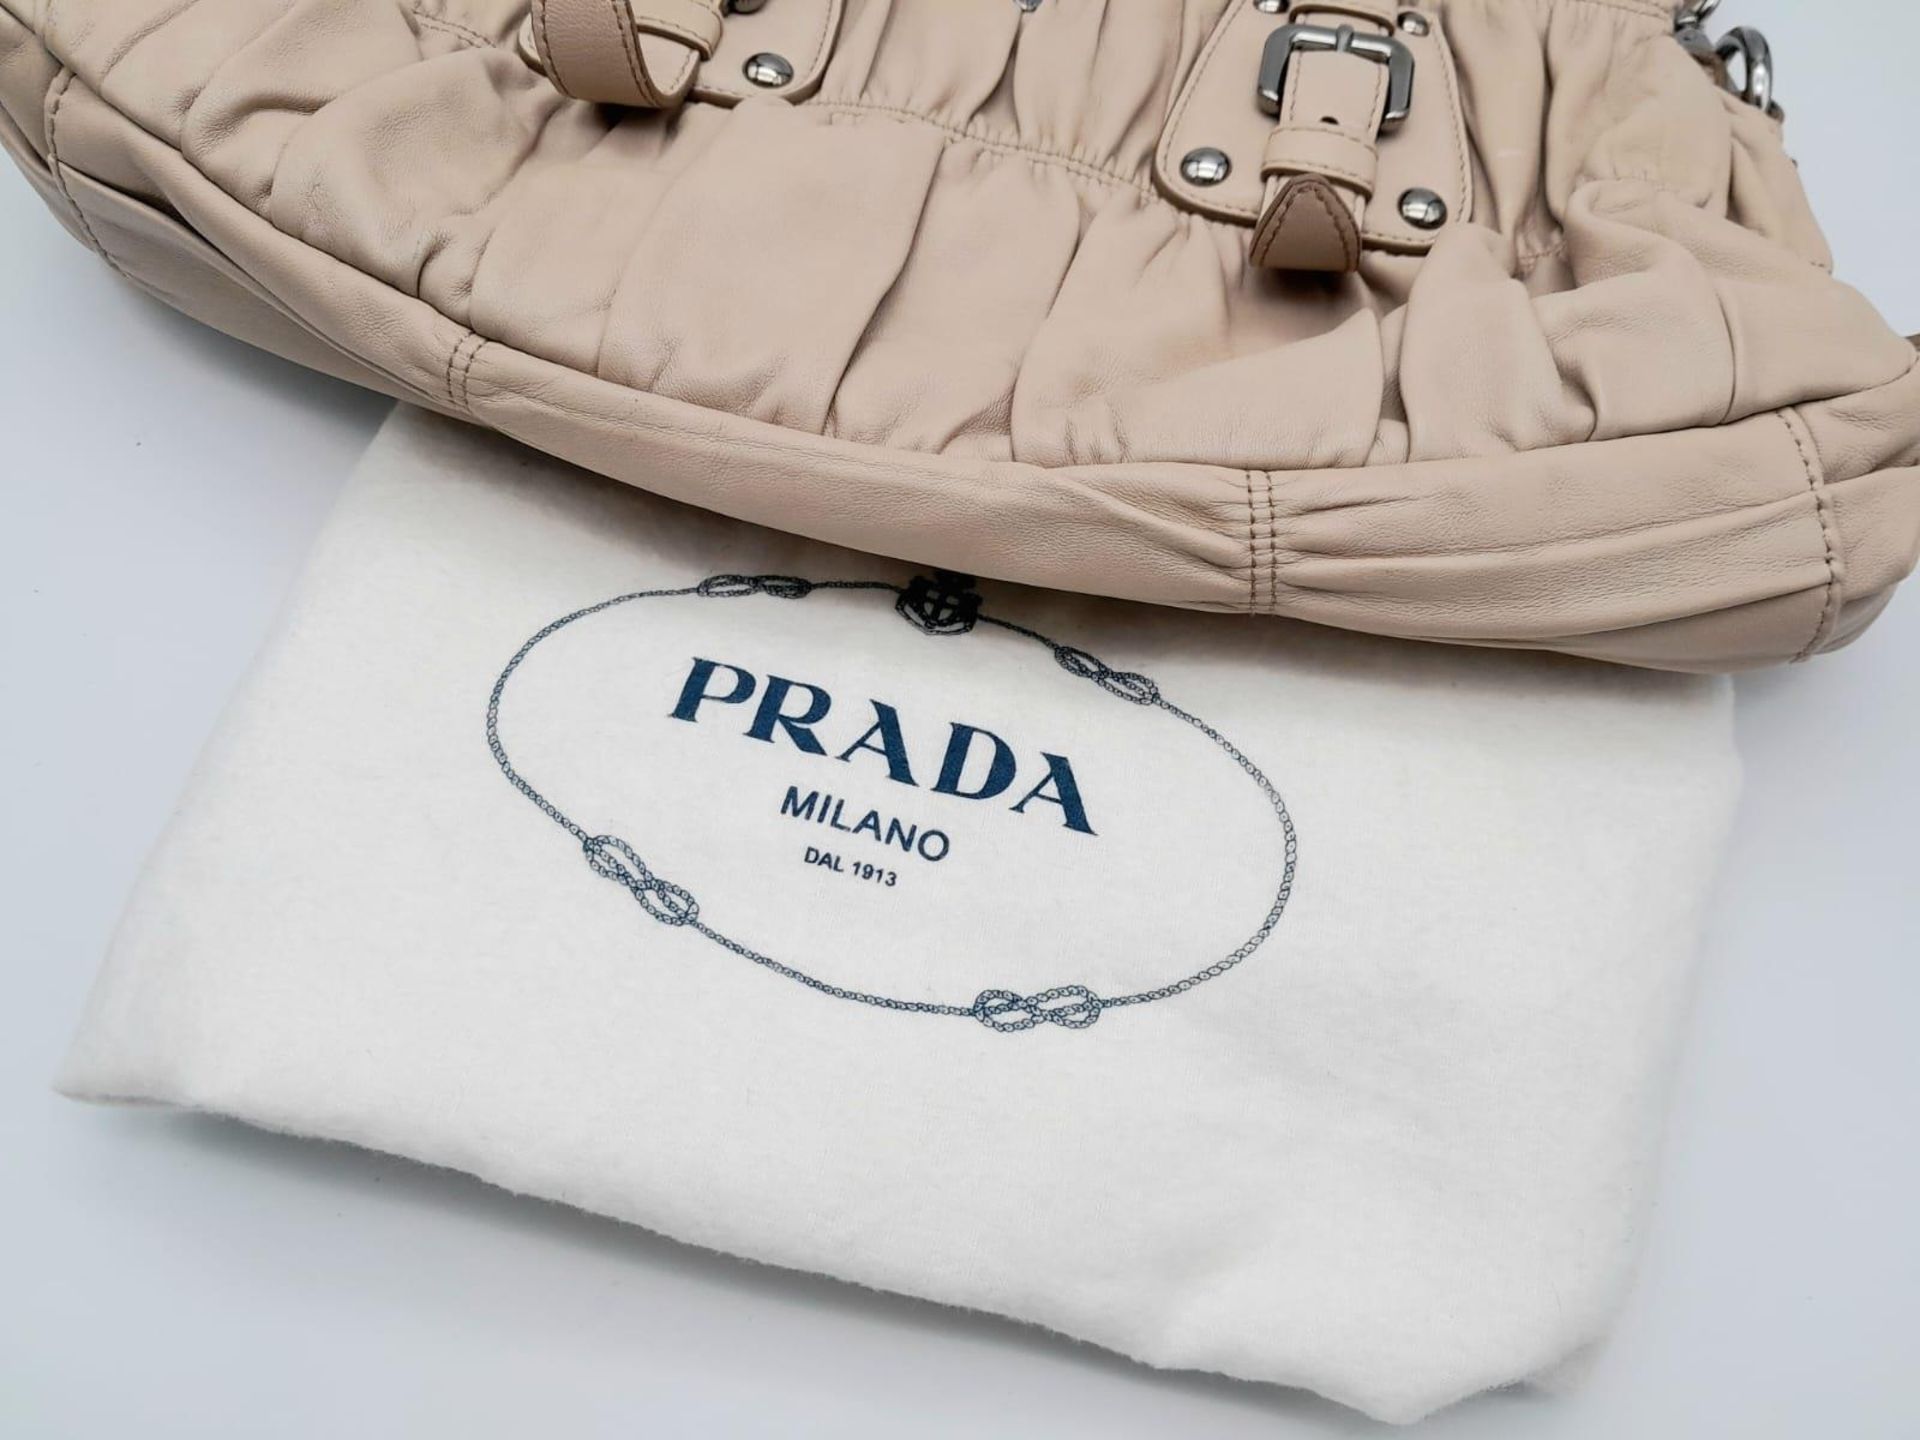 A PRADA BEIGE NAPPA LEATHER GAUFRE POMICE TOTE BAG. SILVER TONE HARD WEAR INCLUDING BUCKLE DETAIL. - Image 23 of 27